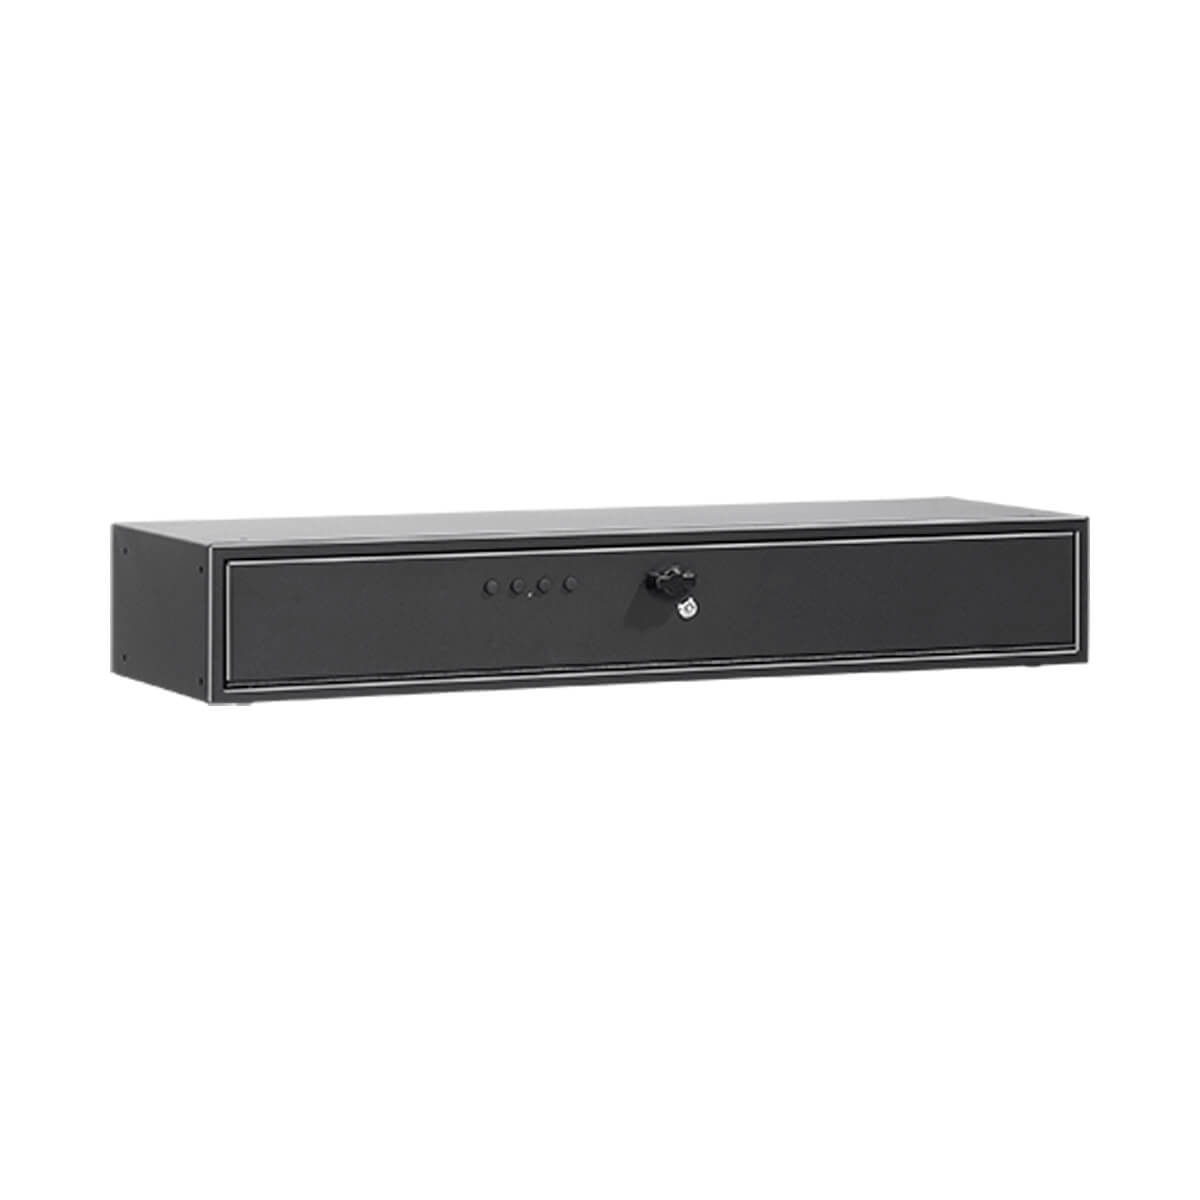 Fast Box™ Model 40 by SecureIt OUT OF STOCK - CALL FOR PRICING